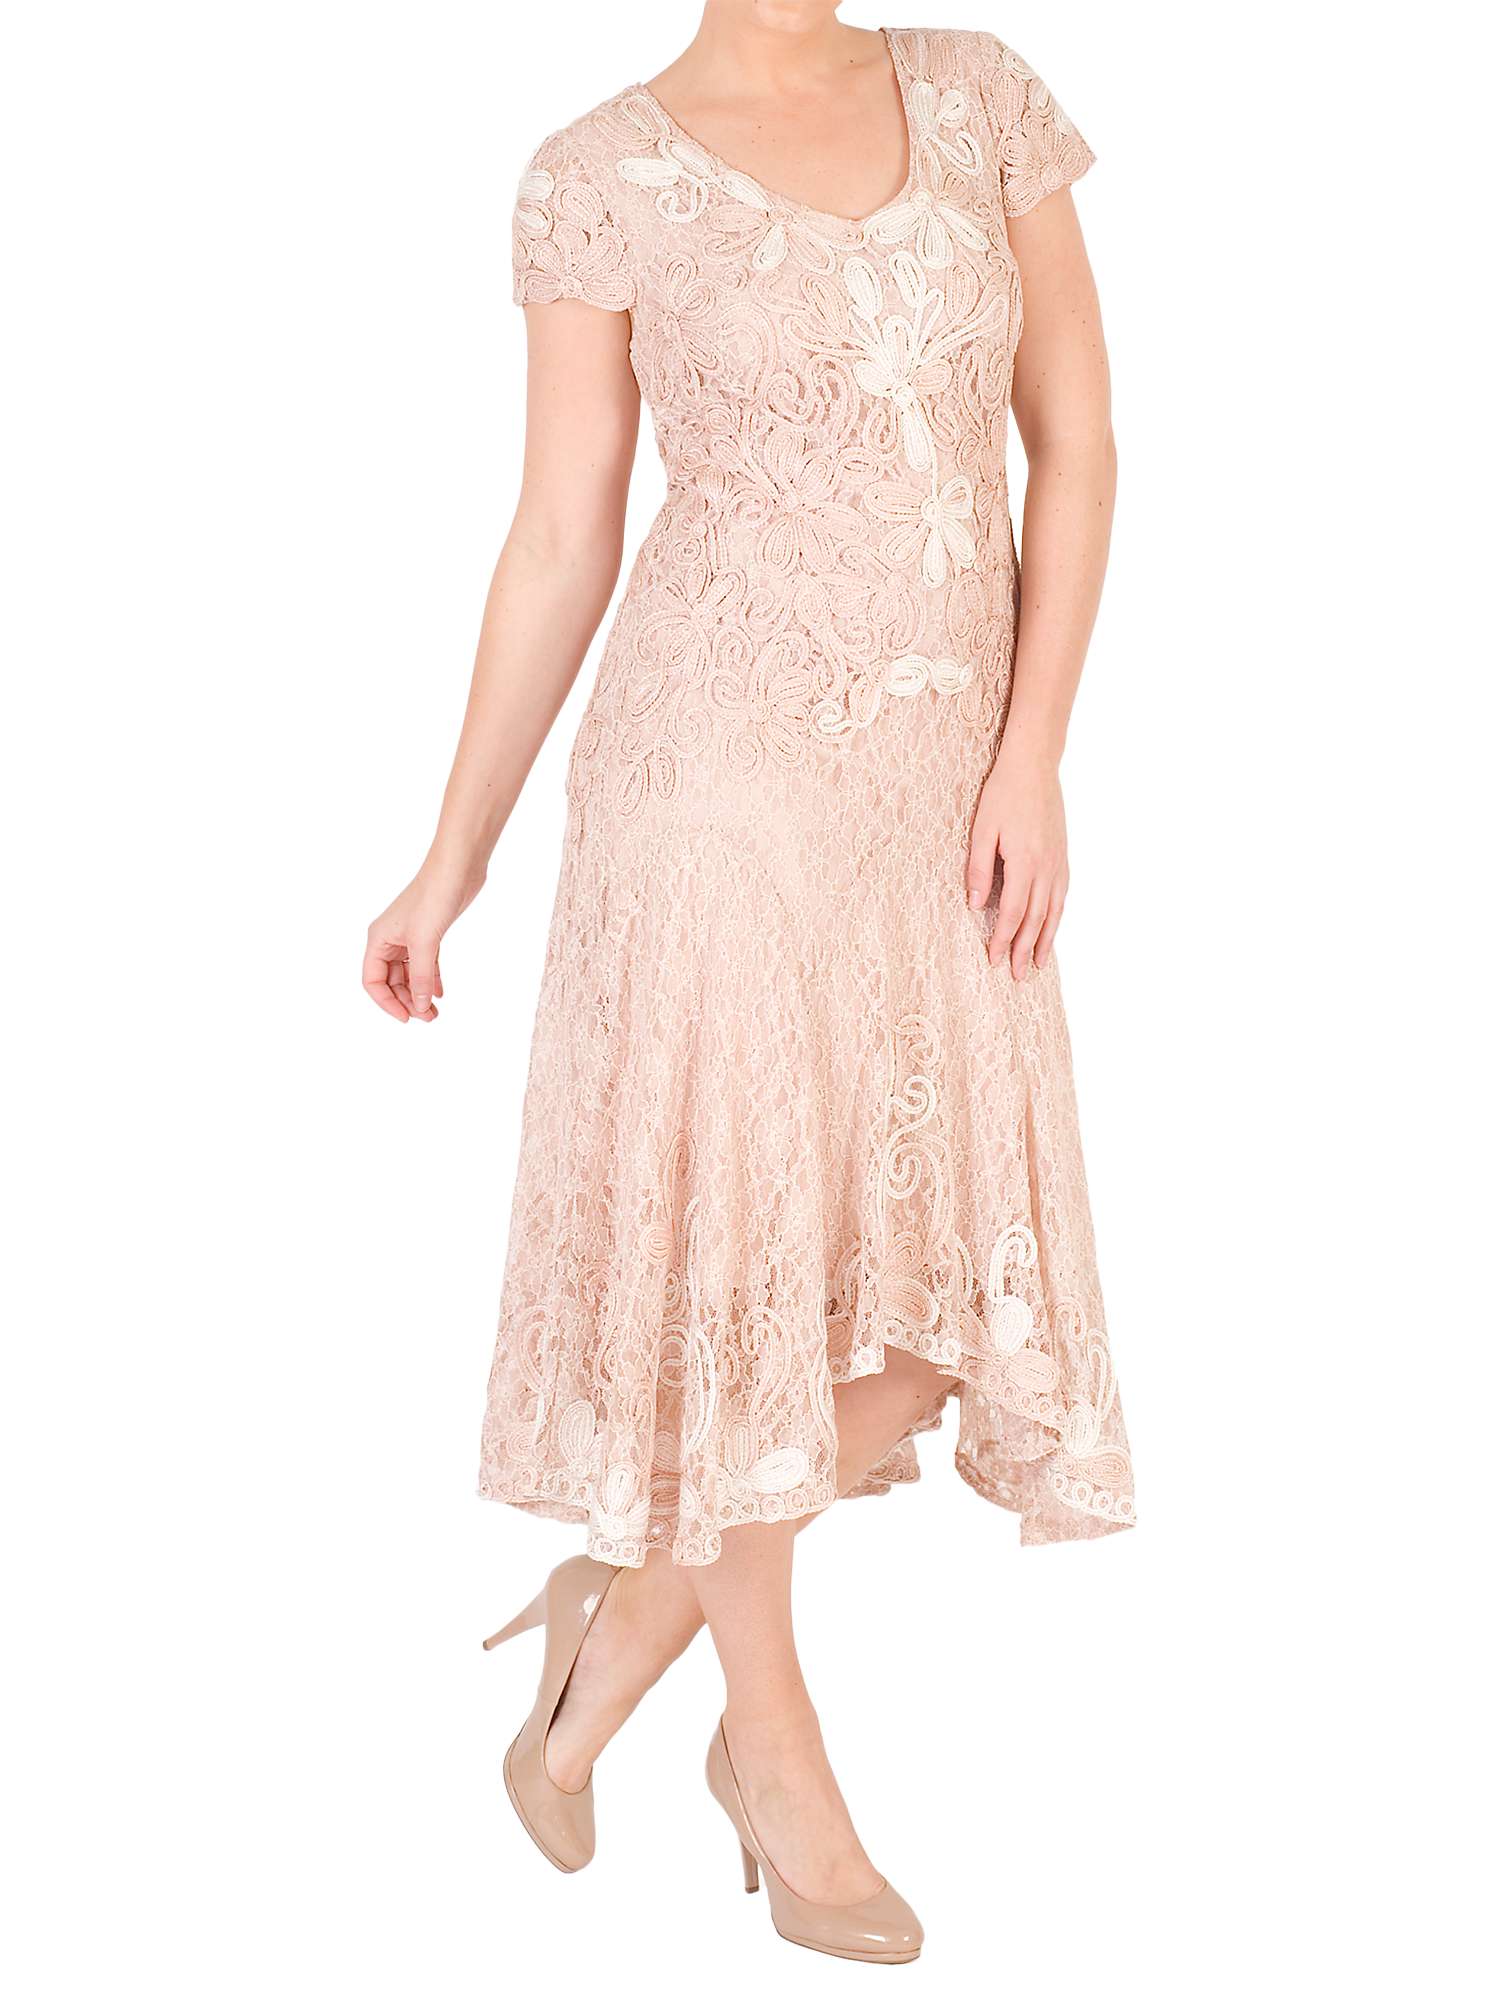 Buy Chesca Ombre Cornelli Lace Dress, Blush/Ivory Online at johnlewis.com